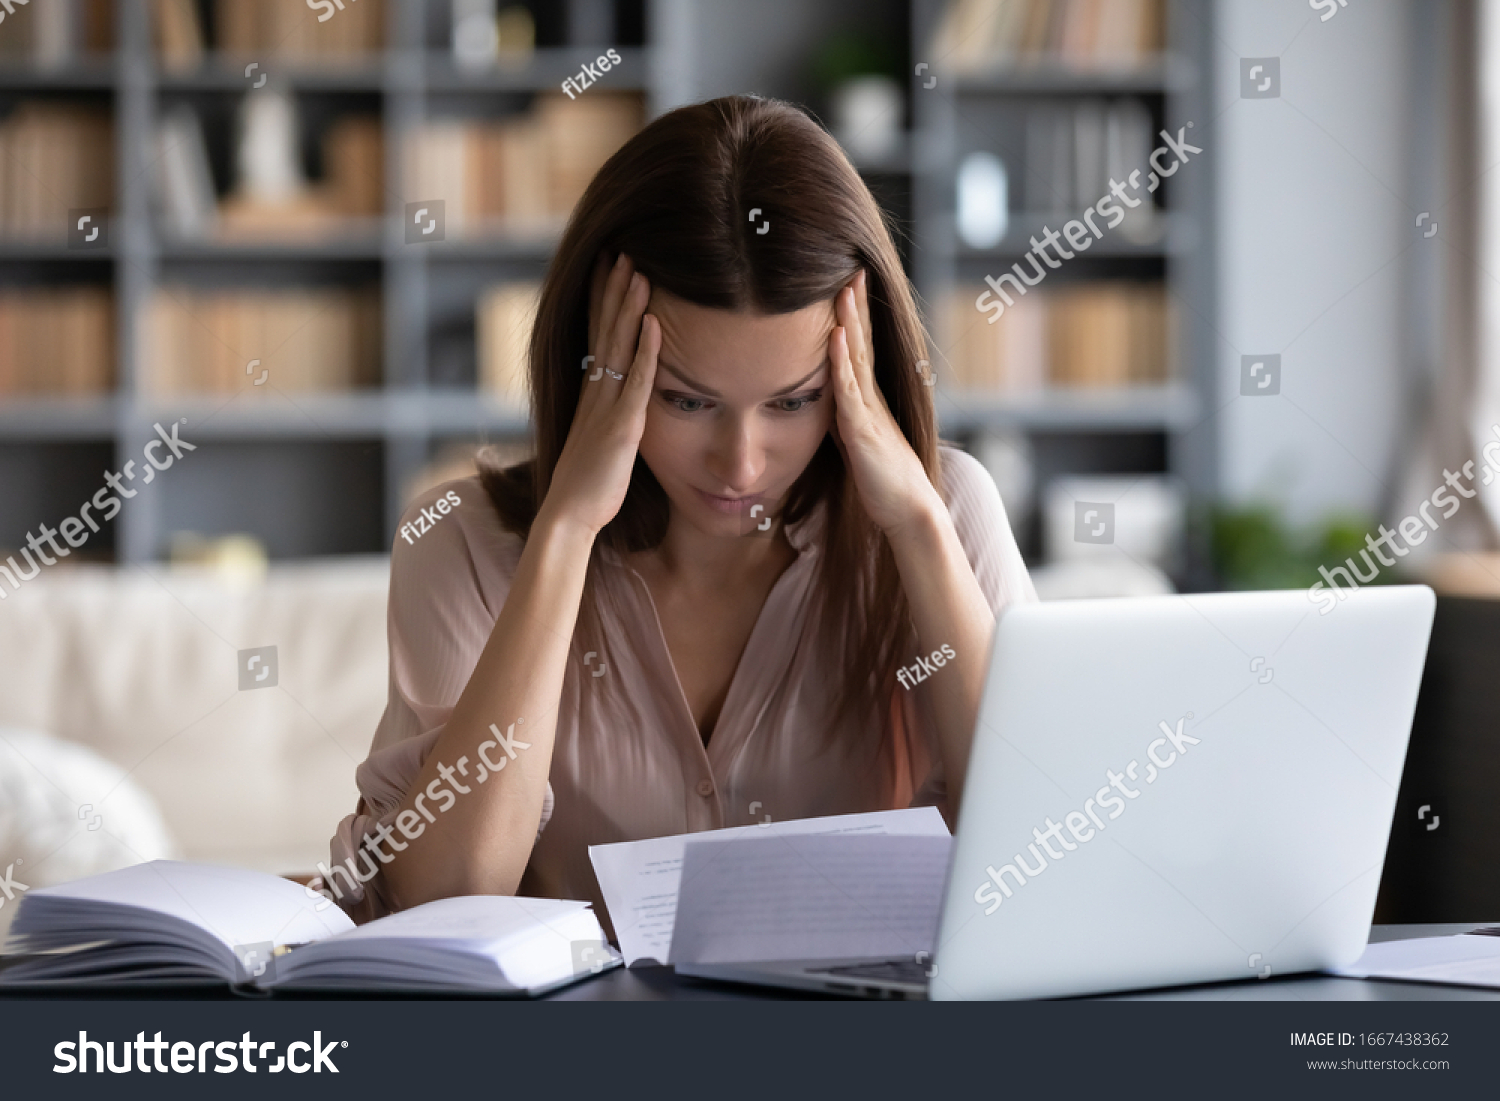 Stressed young woman holding head in hands, feeling desperate about financial problems, dismissive notice, failed test. Depressed businesswoman shocked by bank loan rejection, domestic bills. #1667438362